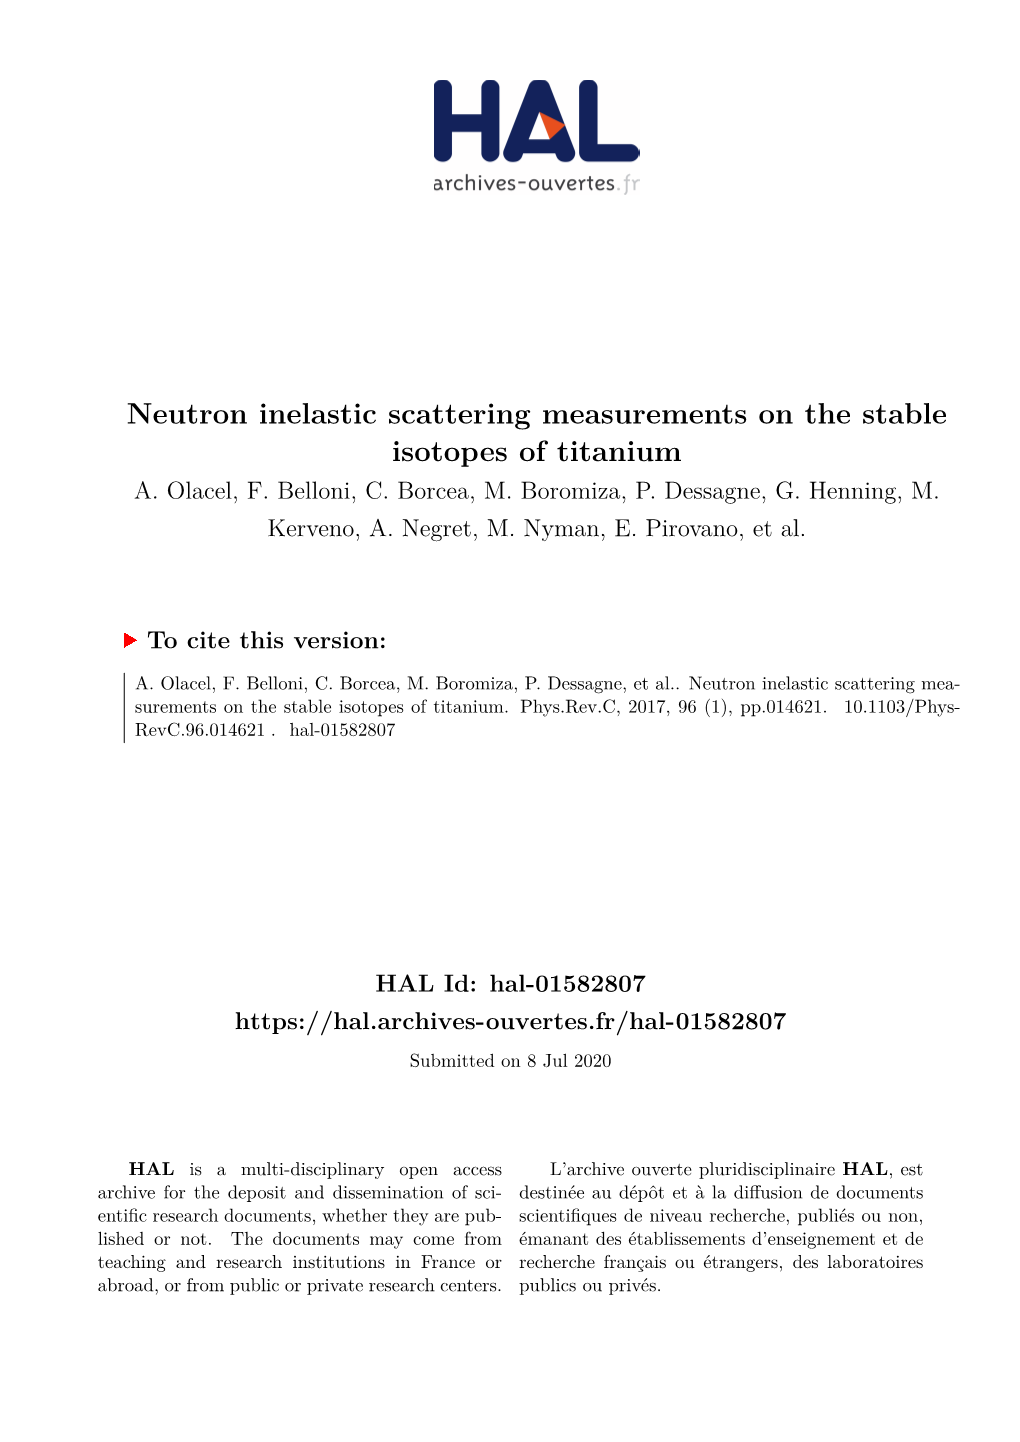 Neutron Inelastic Scattering Measurements on the Stable Isotopes of Titanium A